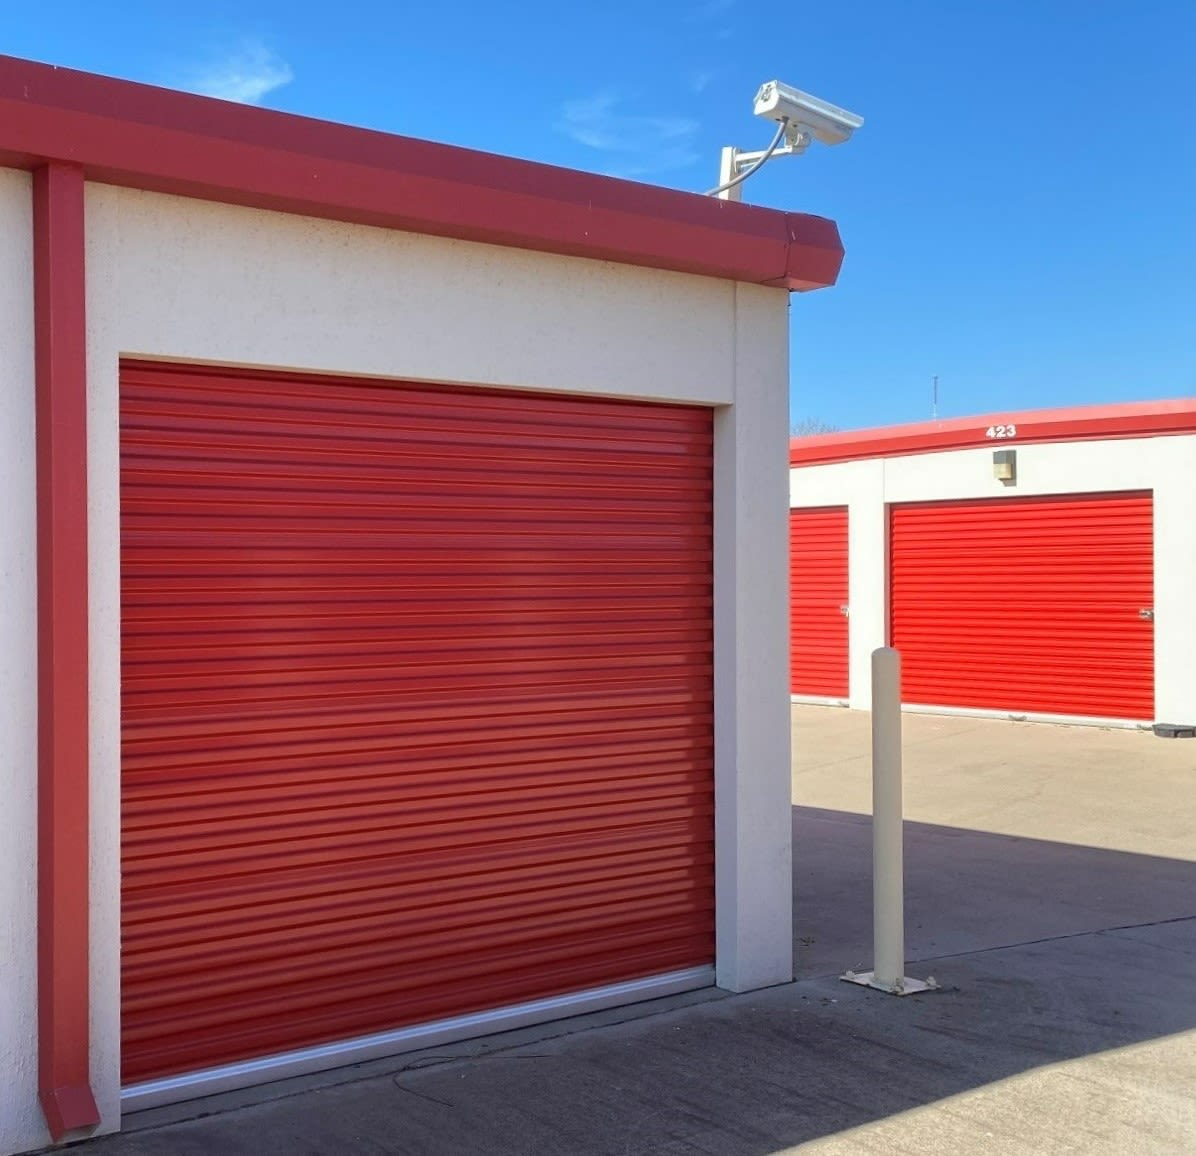 View our features at KO Storage in Wichita Falls, Texas